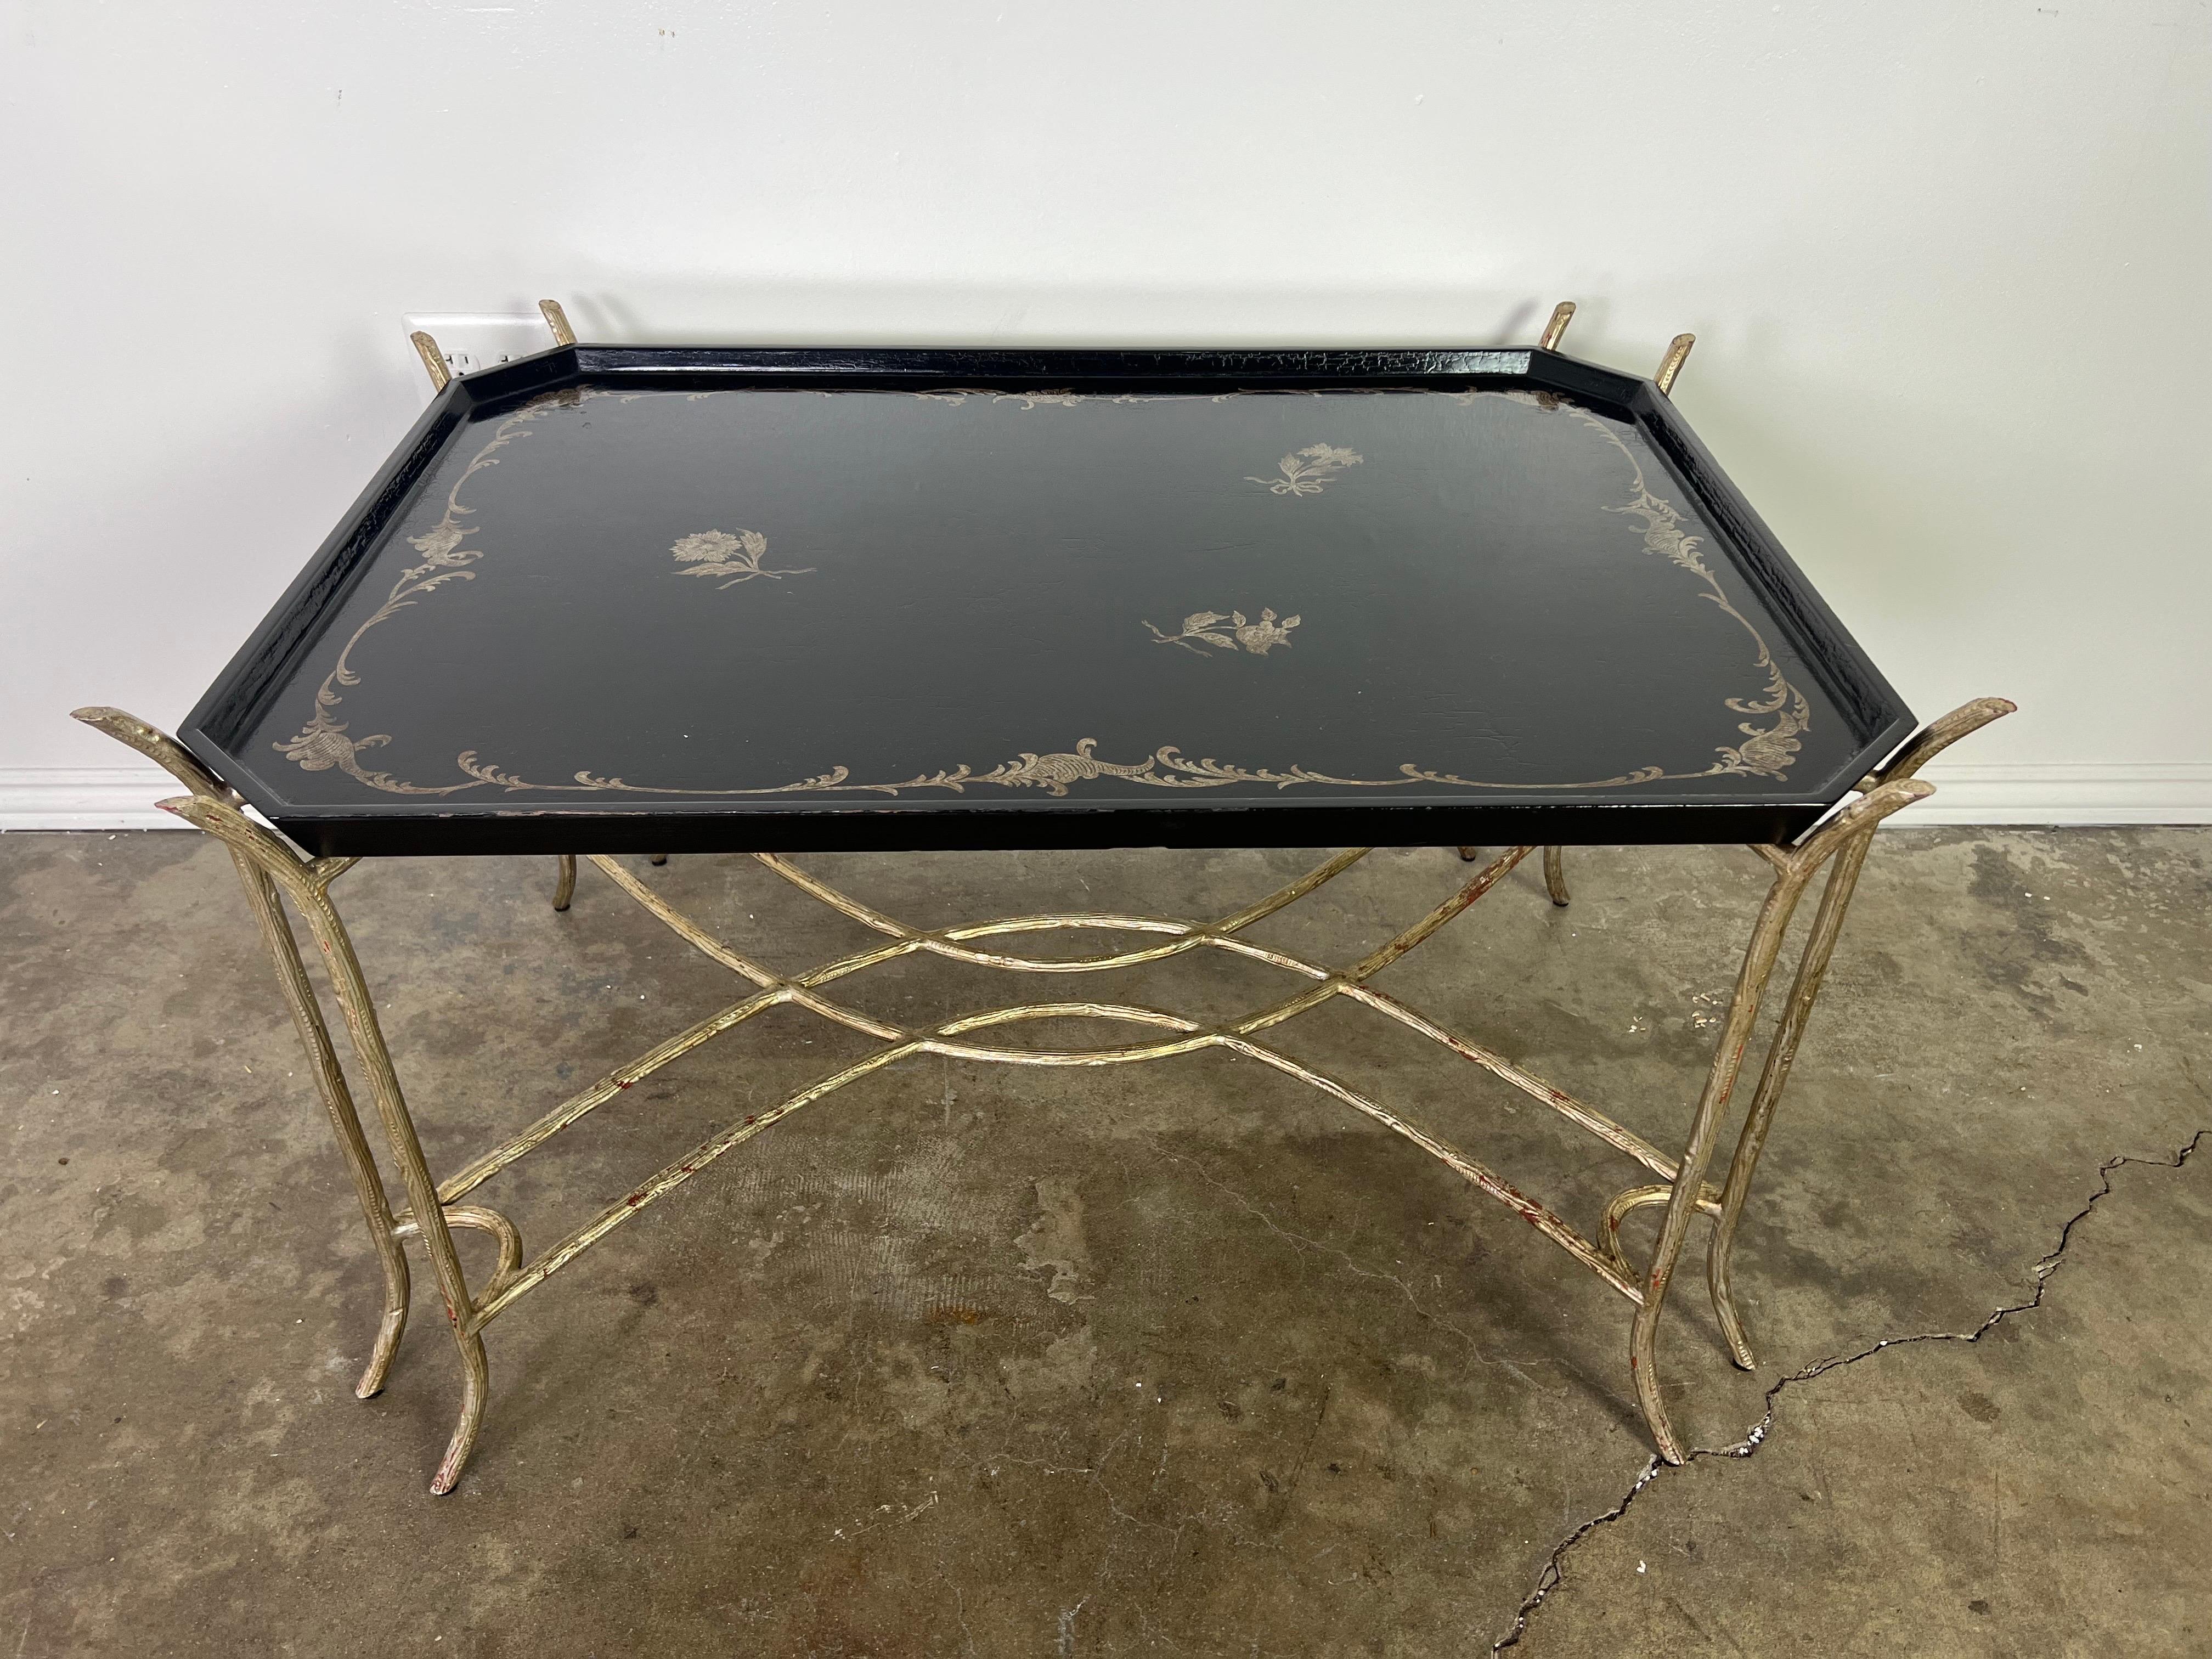 Black lacquered Chinoiserie painted tea table that stand on silvered metal legs that are connected by a bottom stretcher. There are are raised gold chinoiserie details of flowers and acanthus leaves. Good condition.